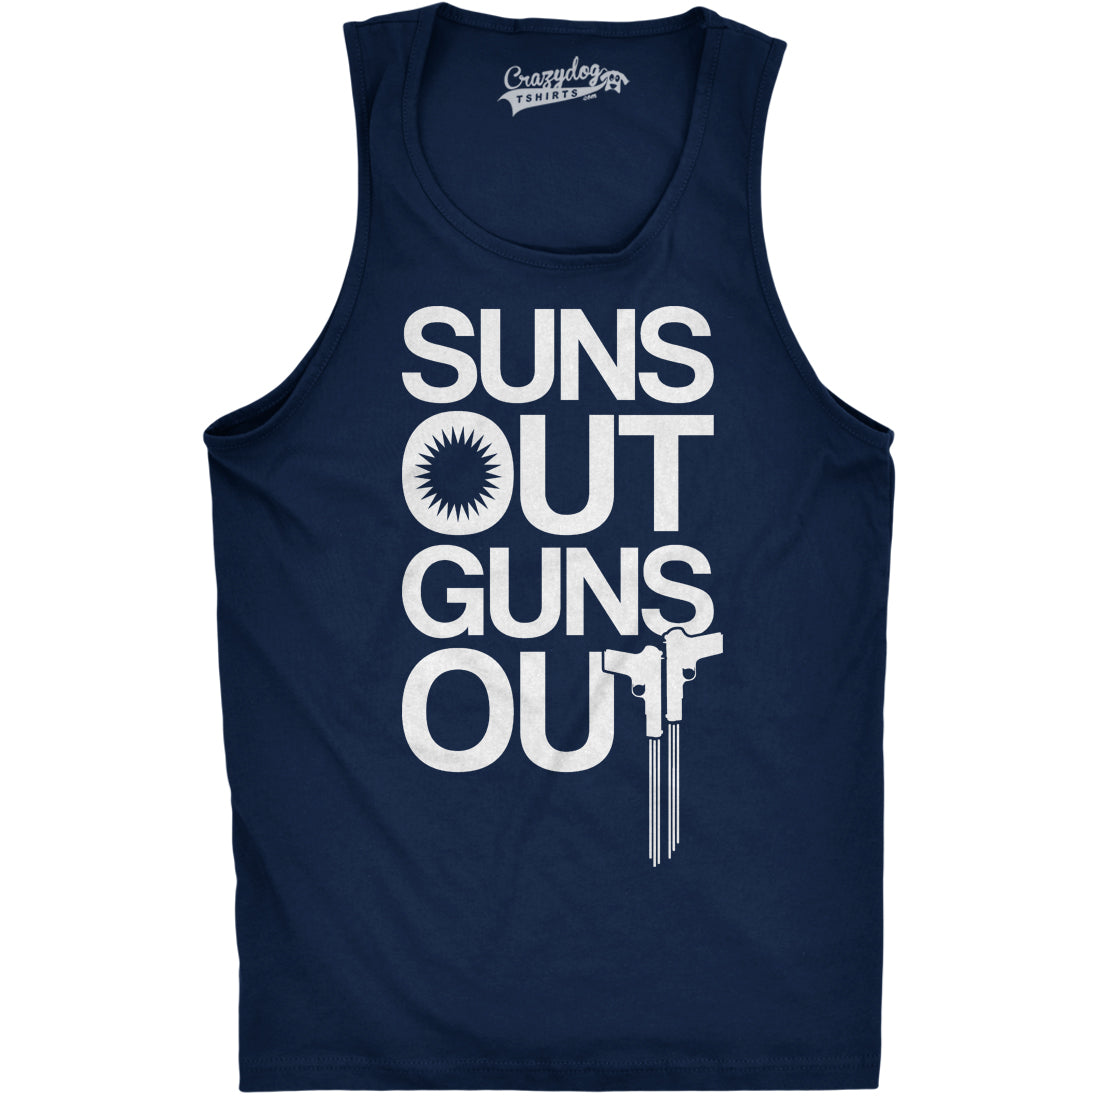 Funny Navy Suns Out Guns Out Mens Tank Top Nerdy Fitness Tee